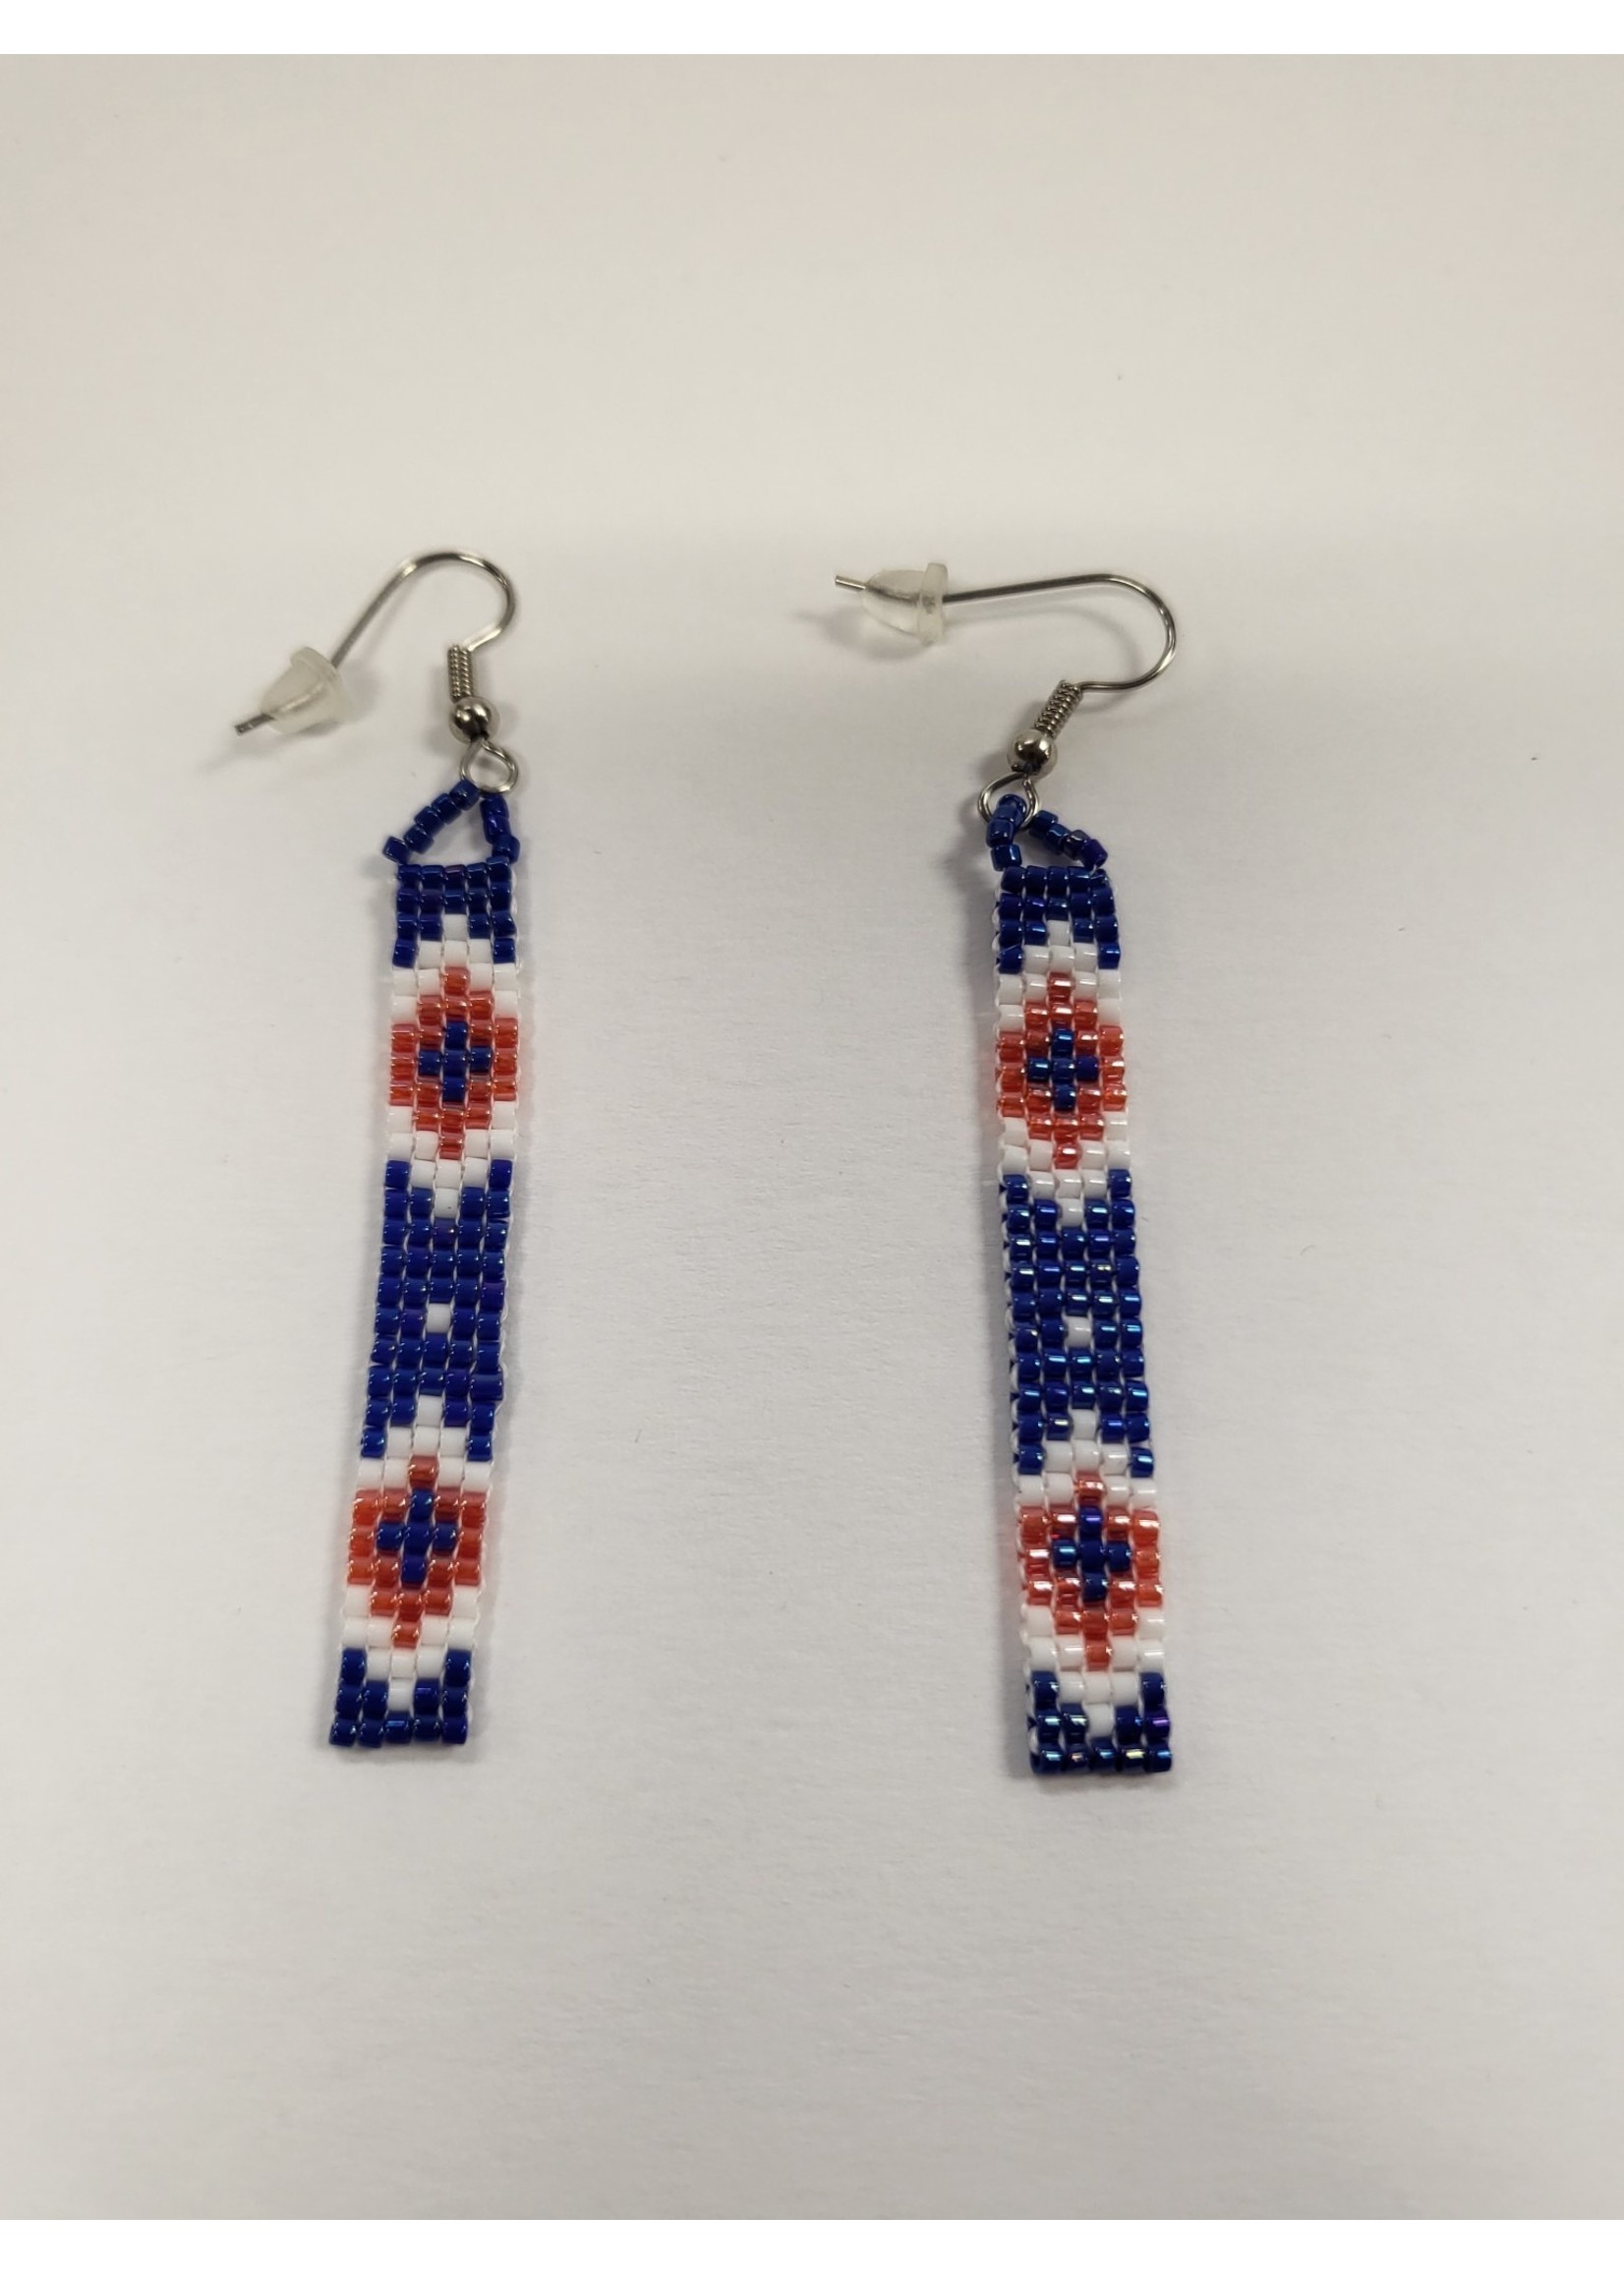 Beaded Earrings - Blue, White and Red